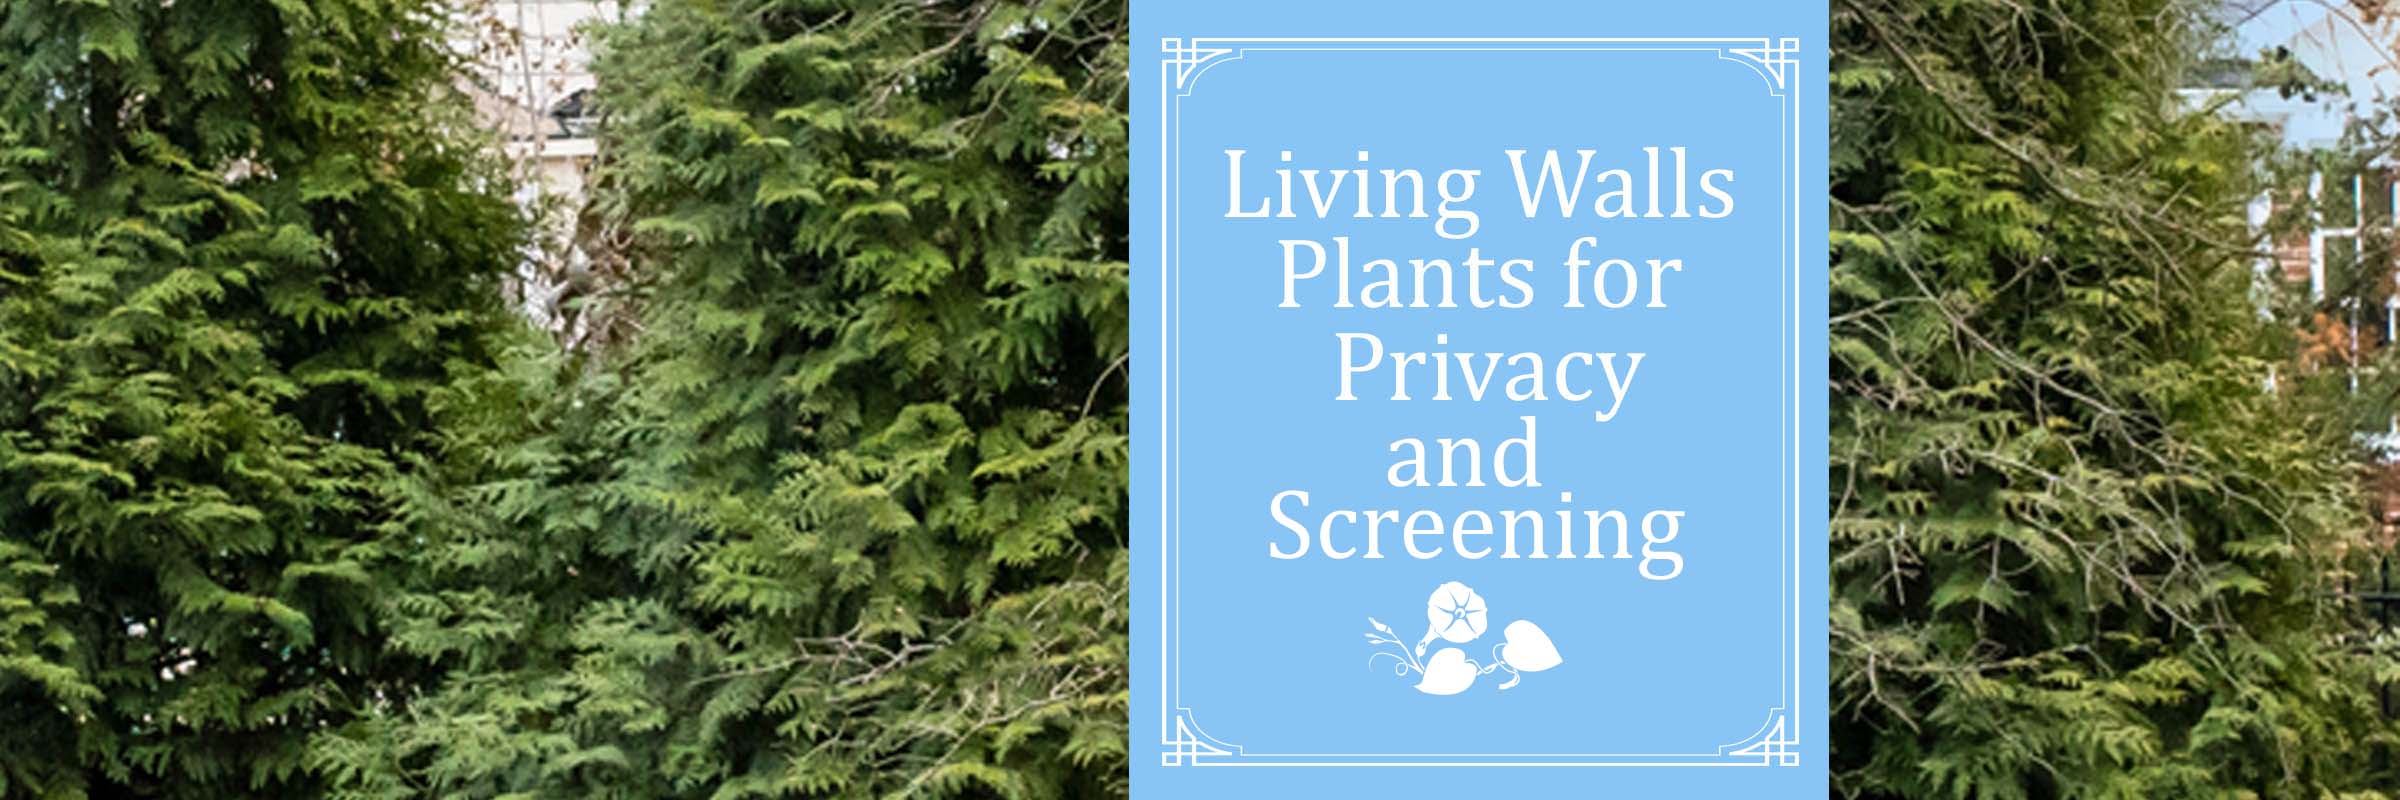 Living Walls Plants for Privacy and Screening